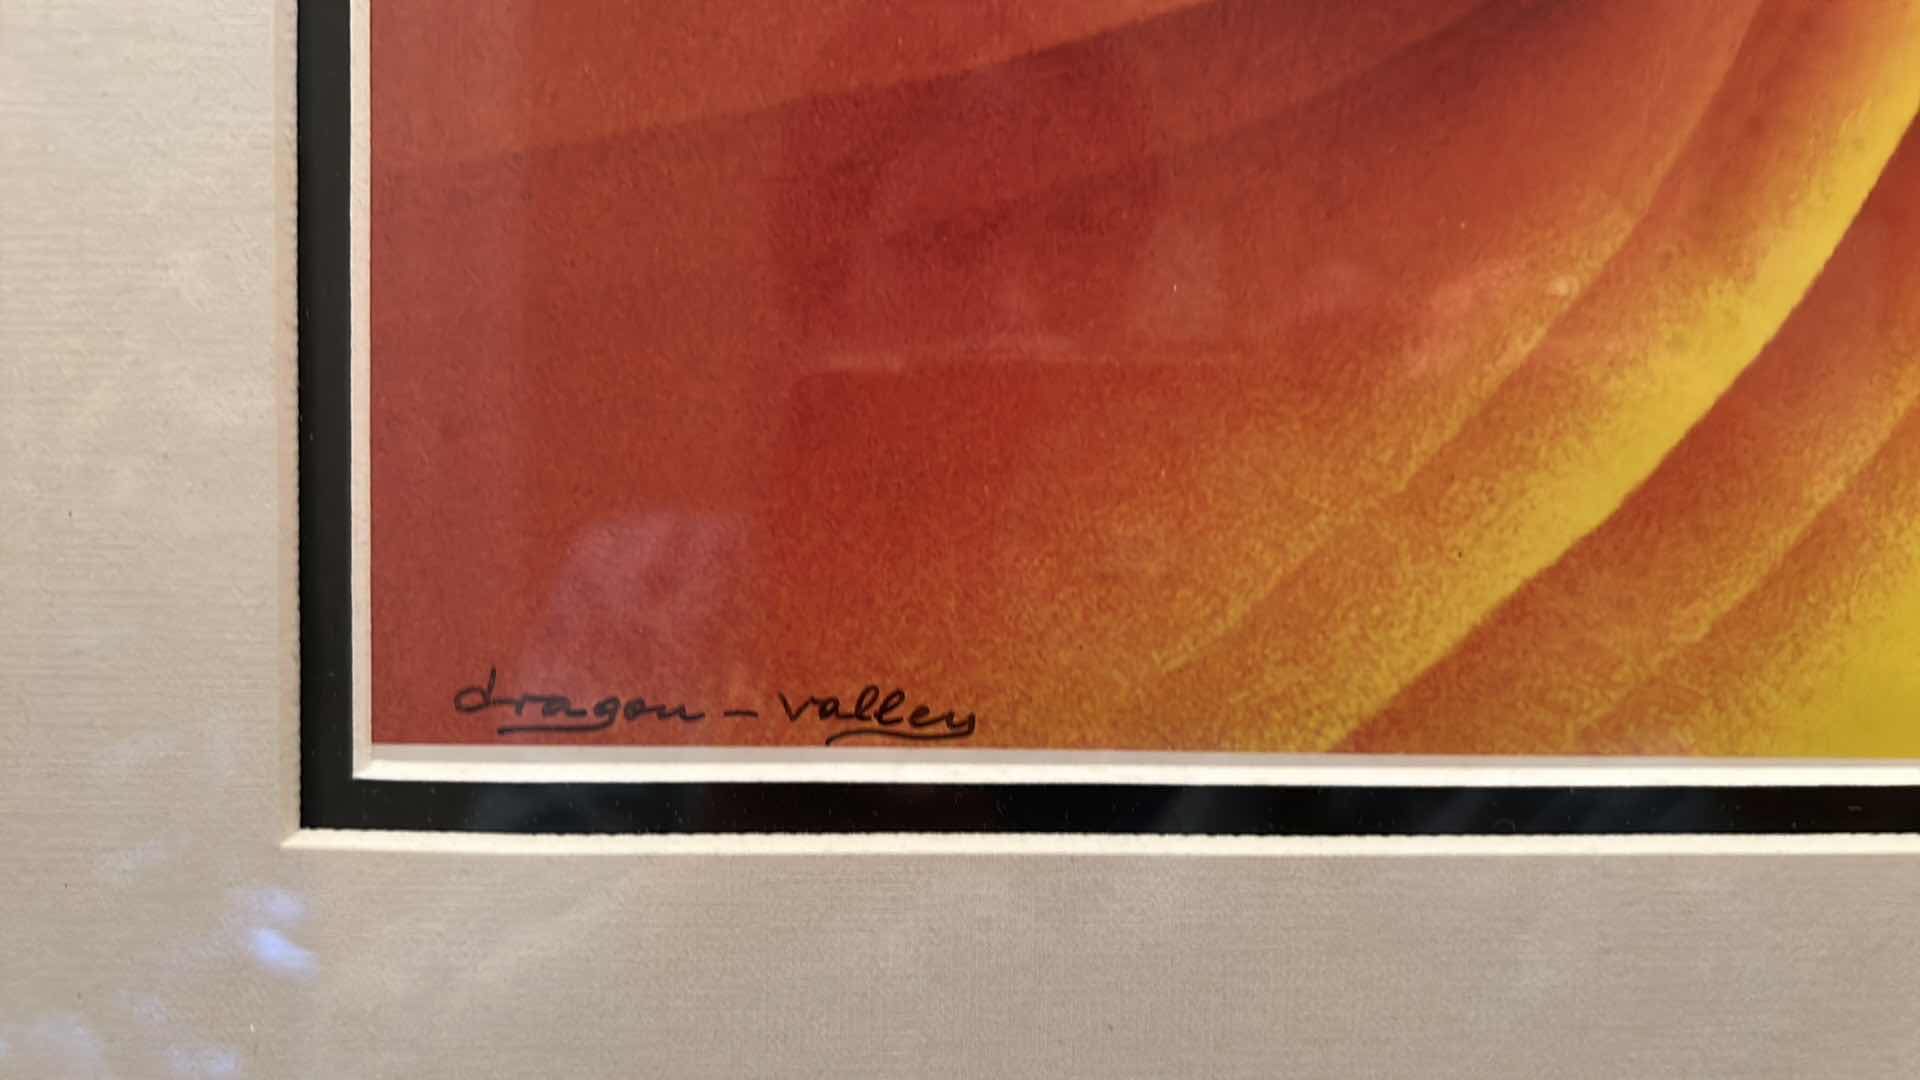 Photo 3 of ARTIST SIGNED AND DATED “DRAGON VALLEY” ARTWORK FRAMED 25” x 21”